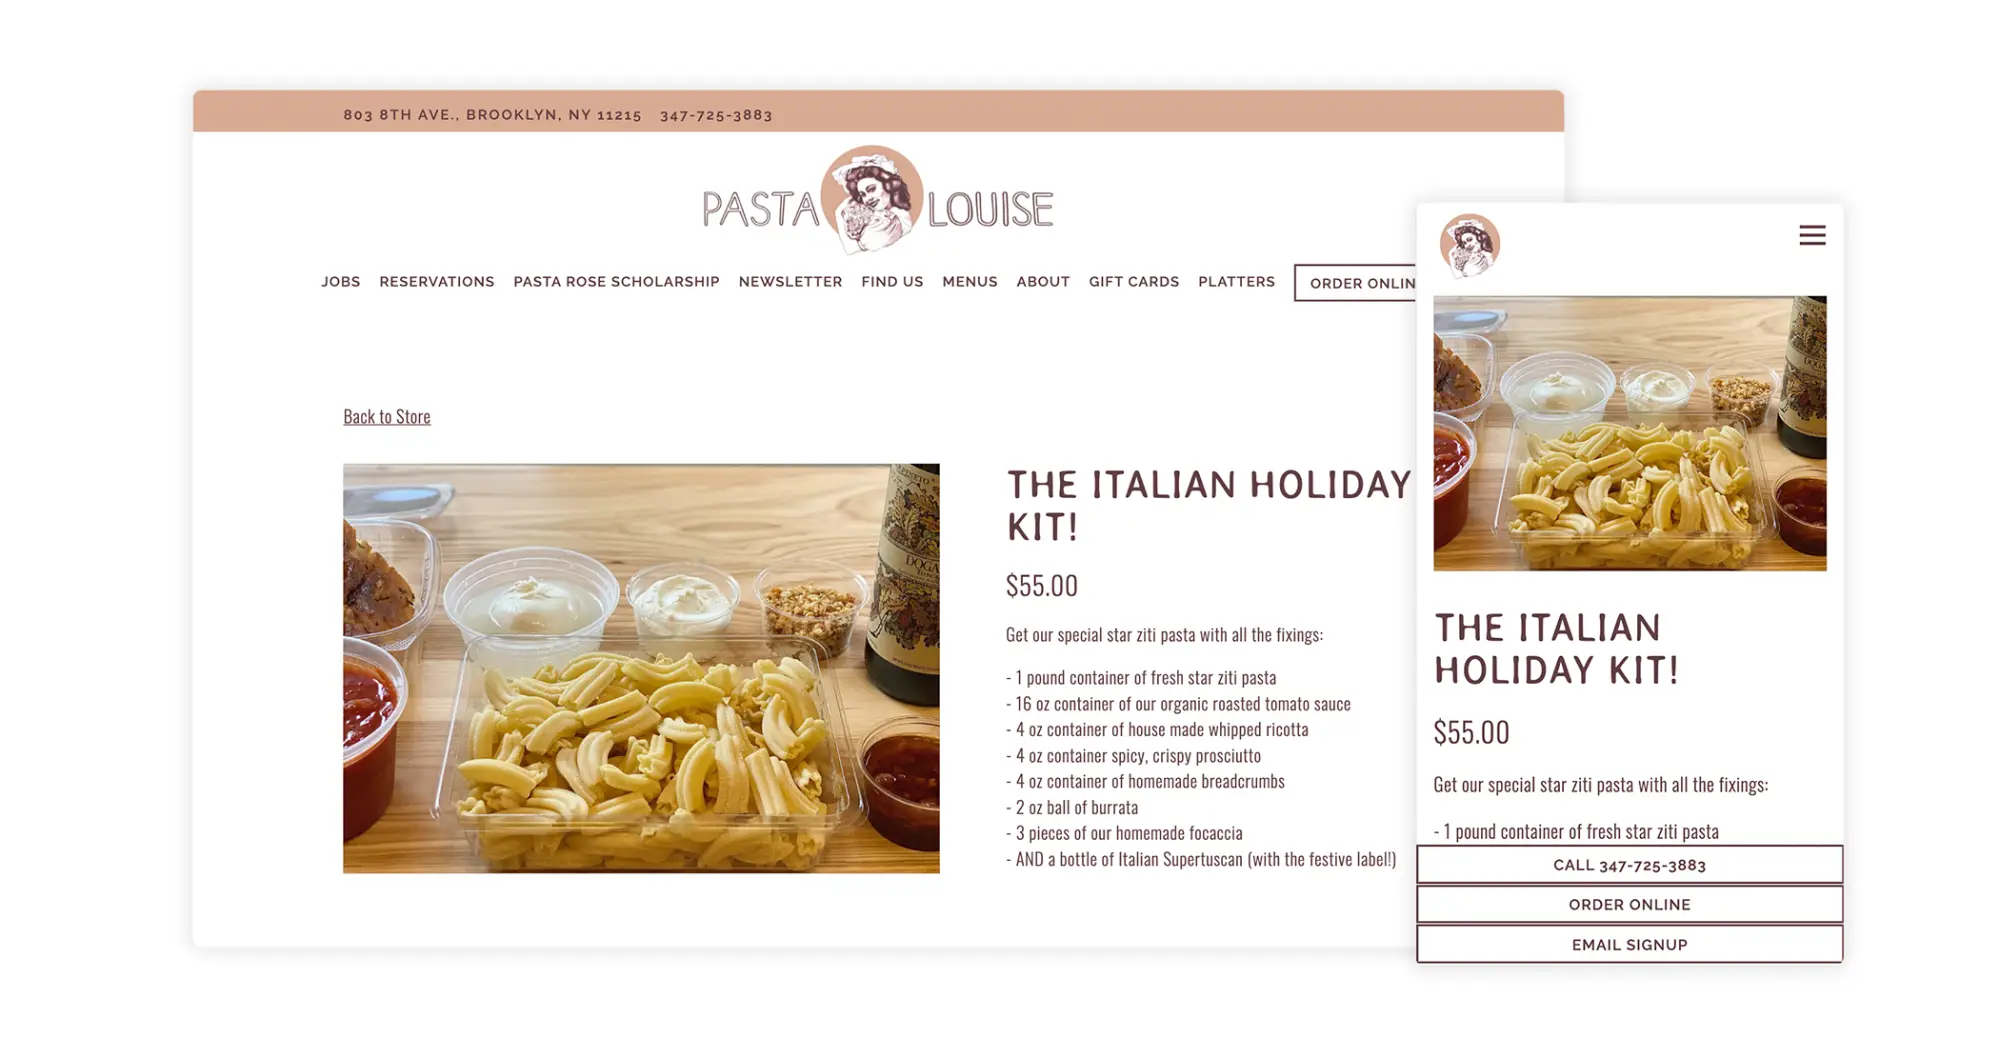 the website for pasta louise